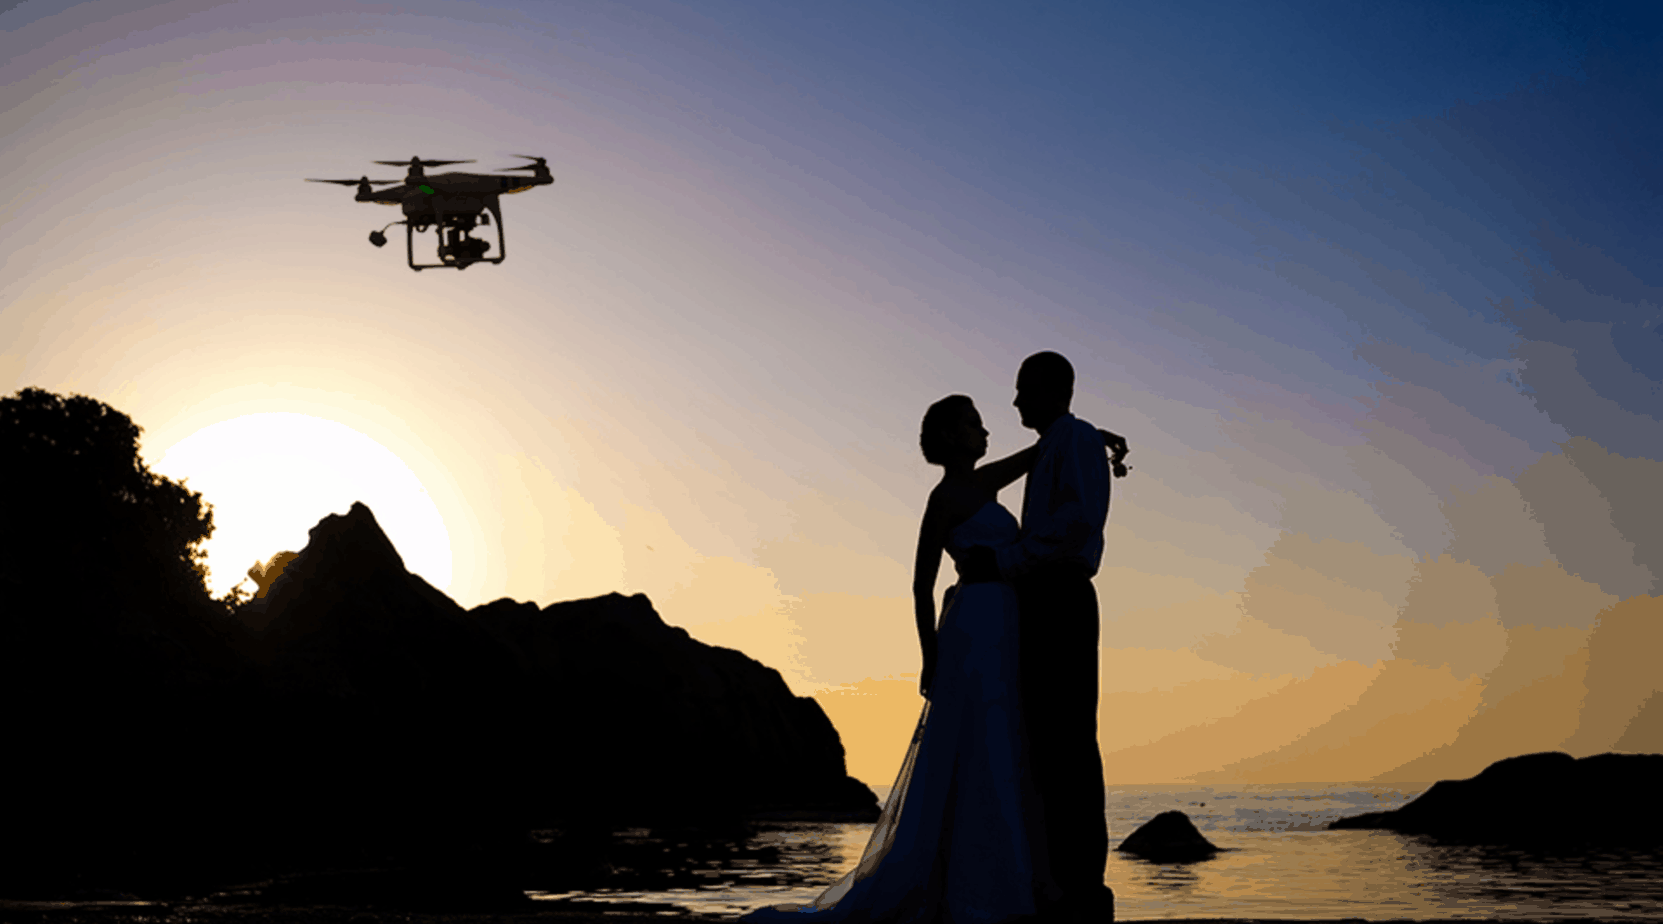 How To Start A Drone Photography Business